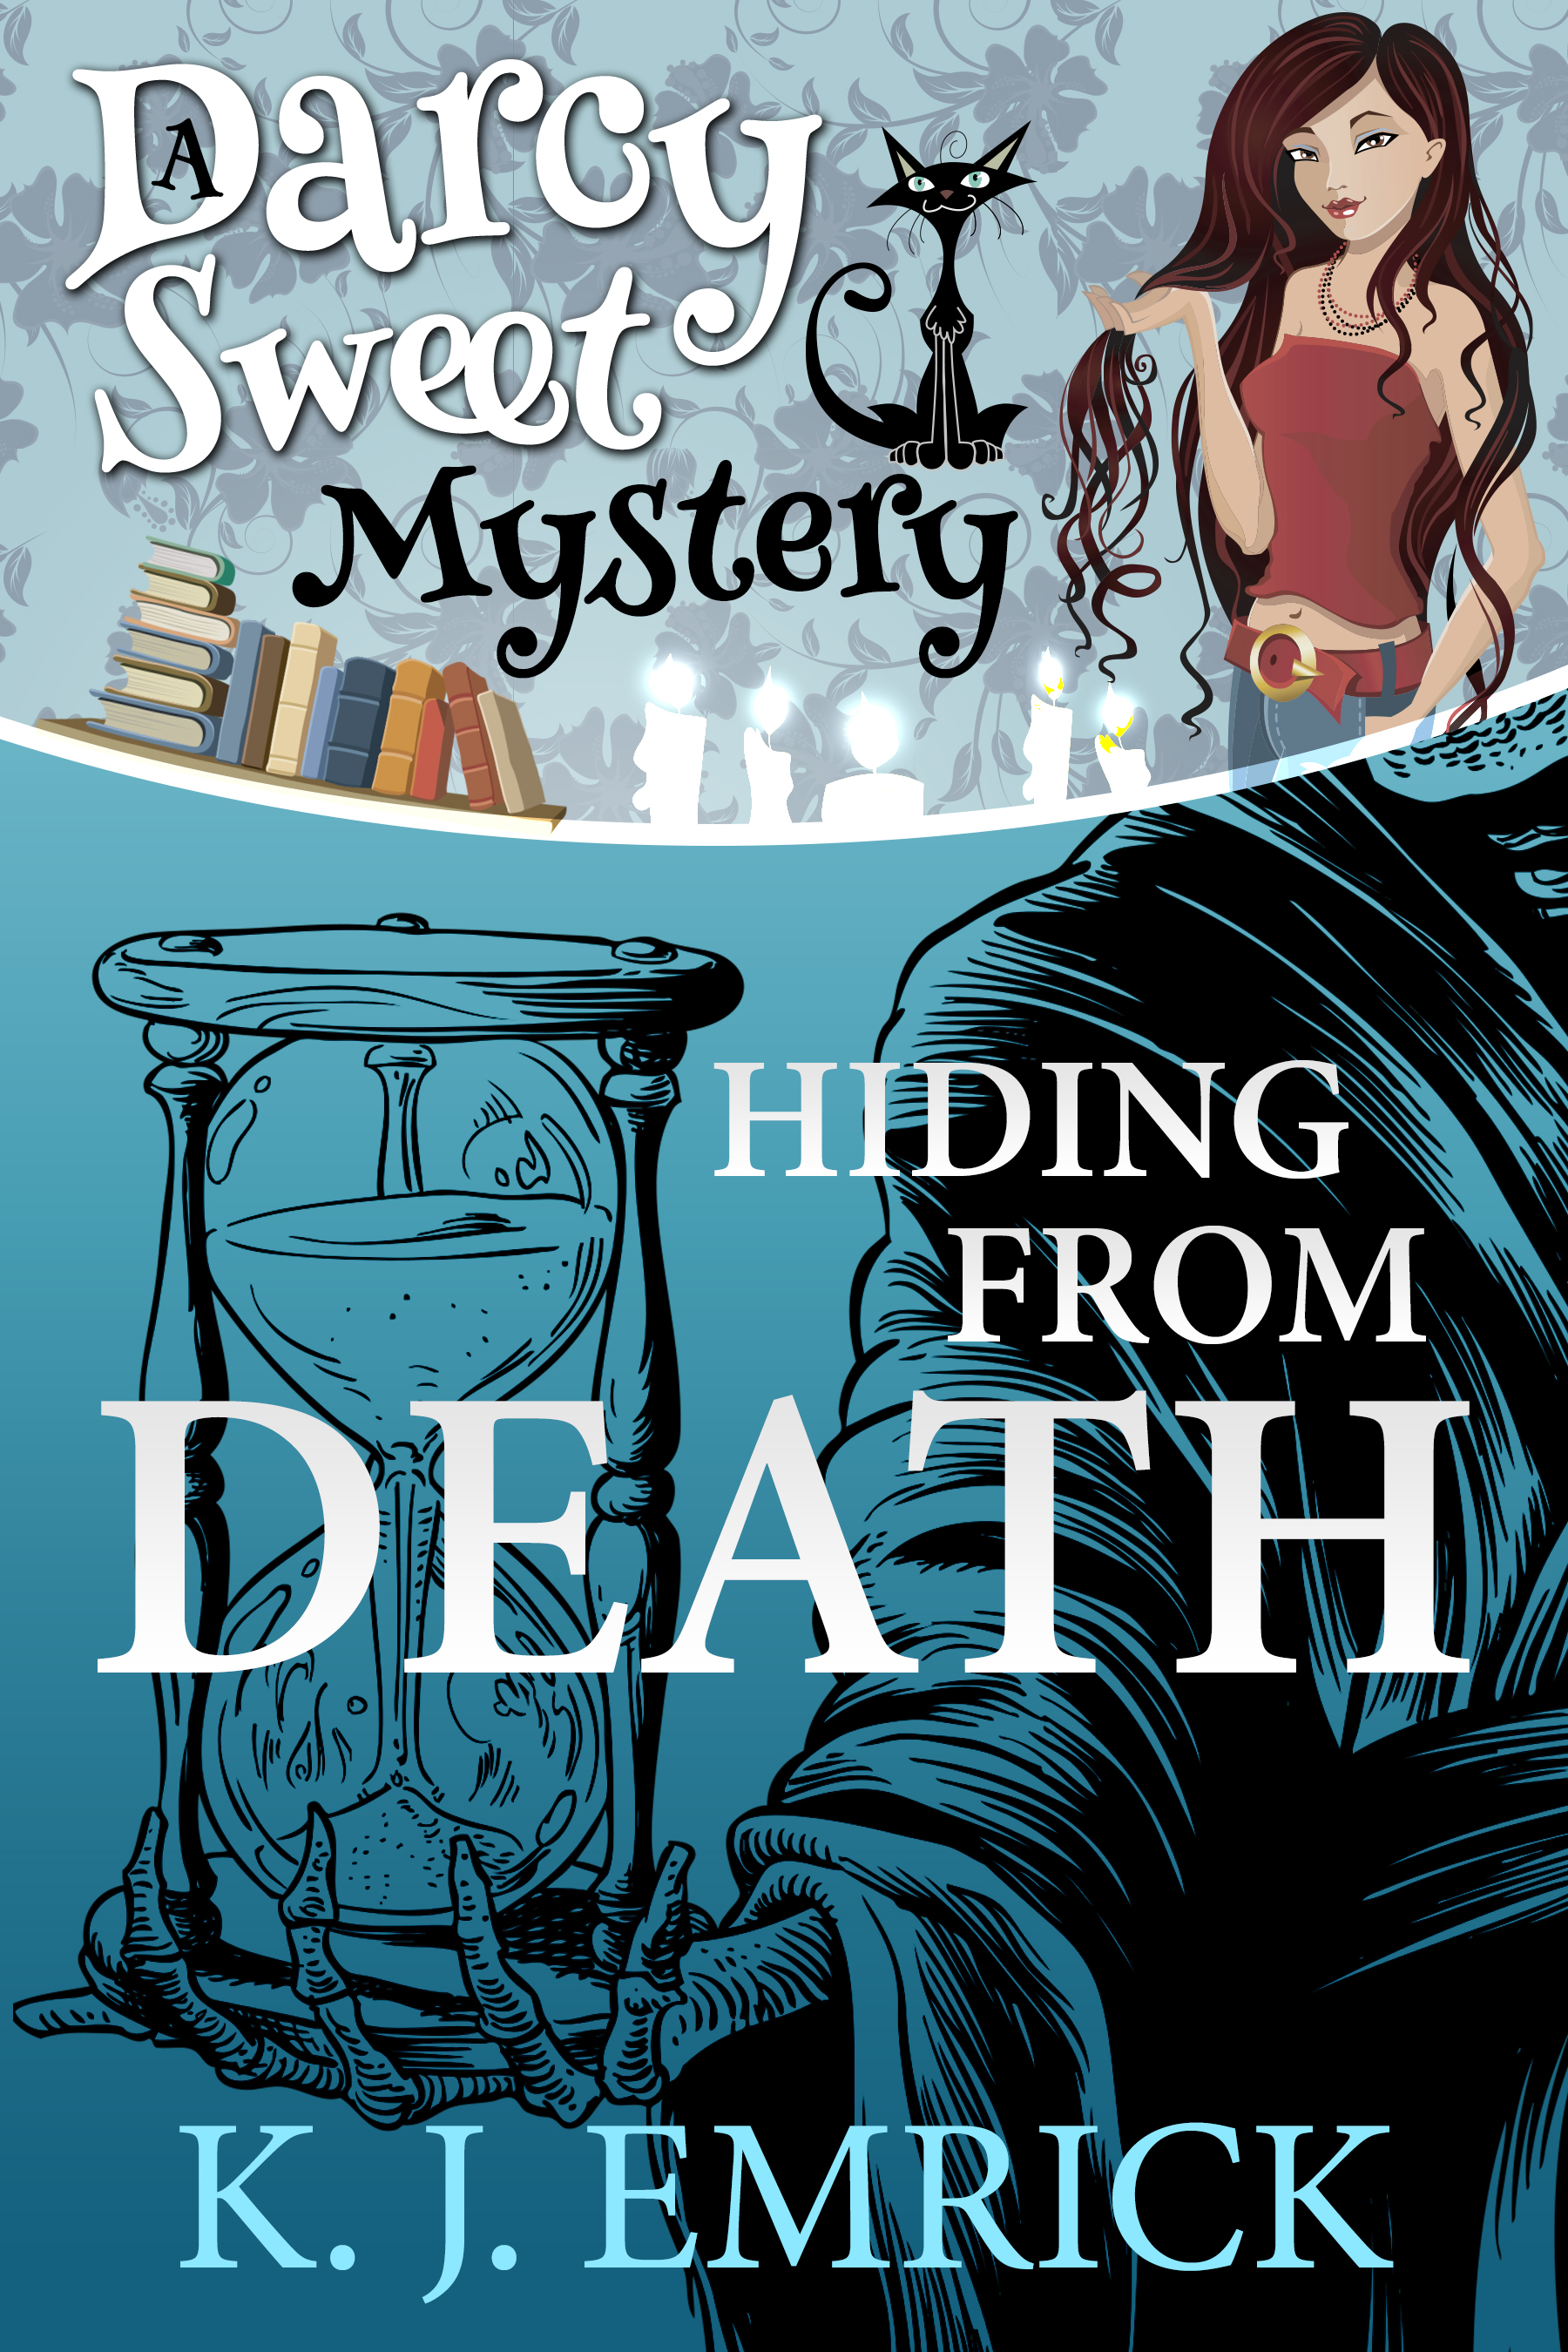 Hiding from Death - A Darcy Sweet Mystery